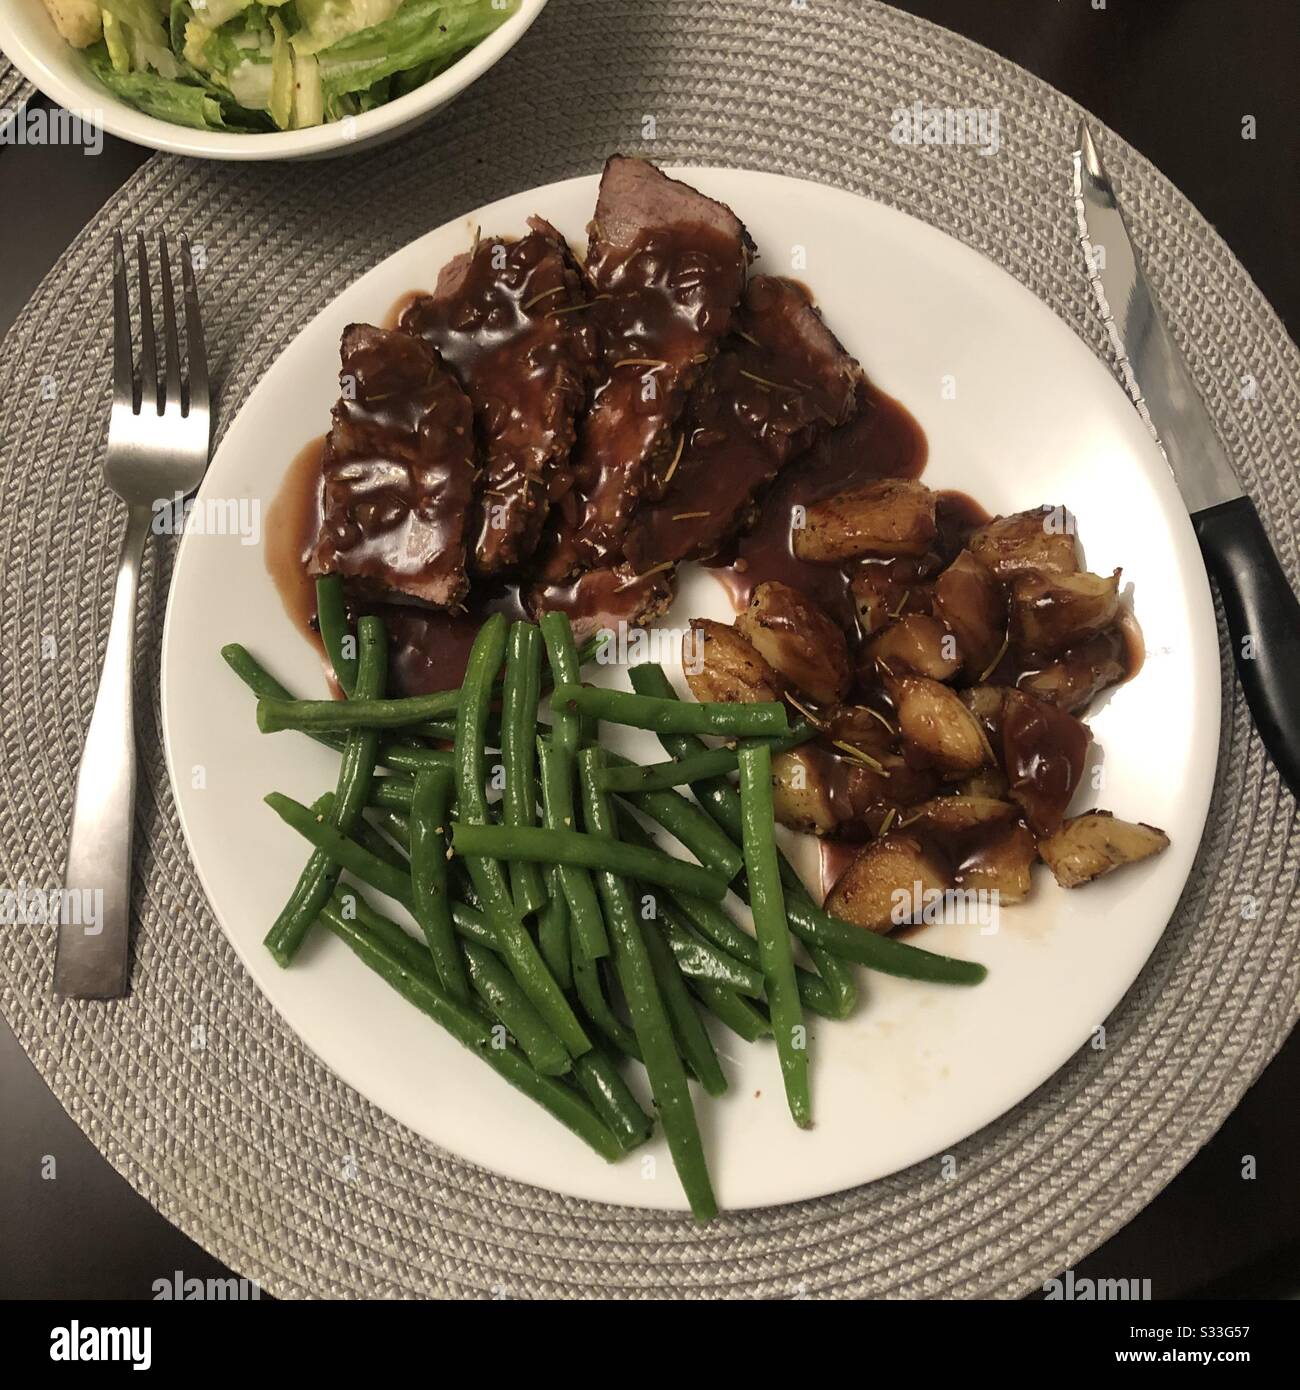 Horseradish Crusted Beef Striploin with green beans and roasted potatoes Stock Photo